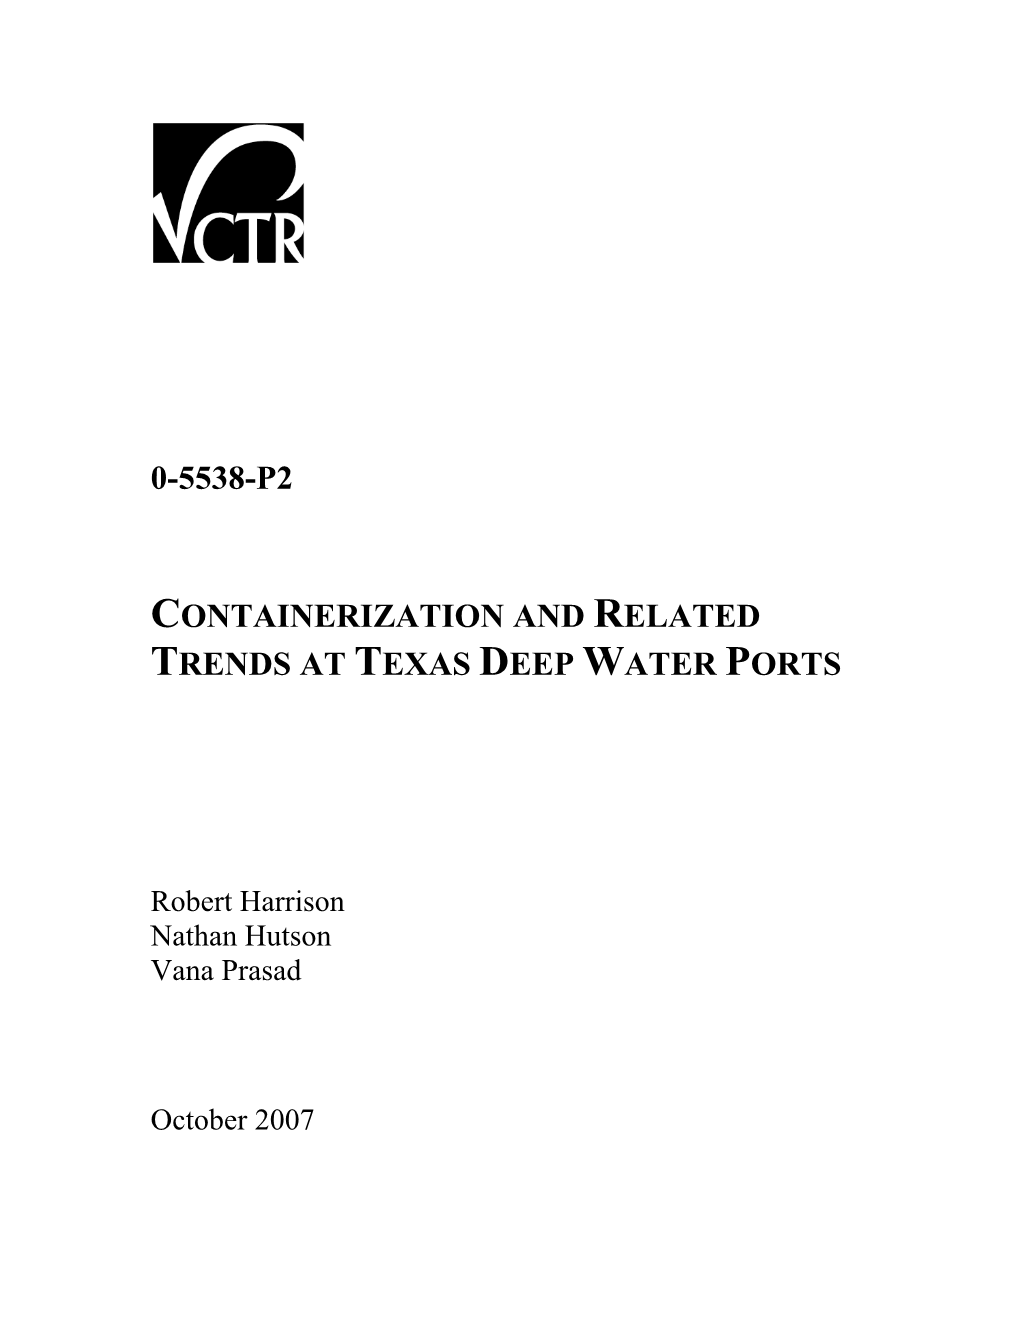 Containerization and Related Trends at Texas Deep Water Ports